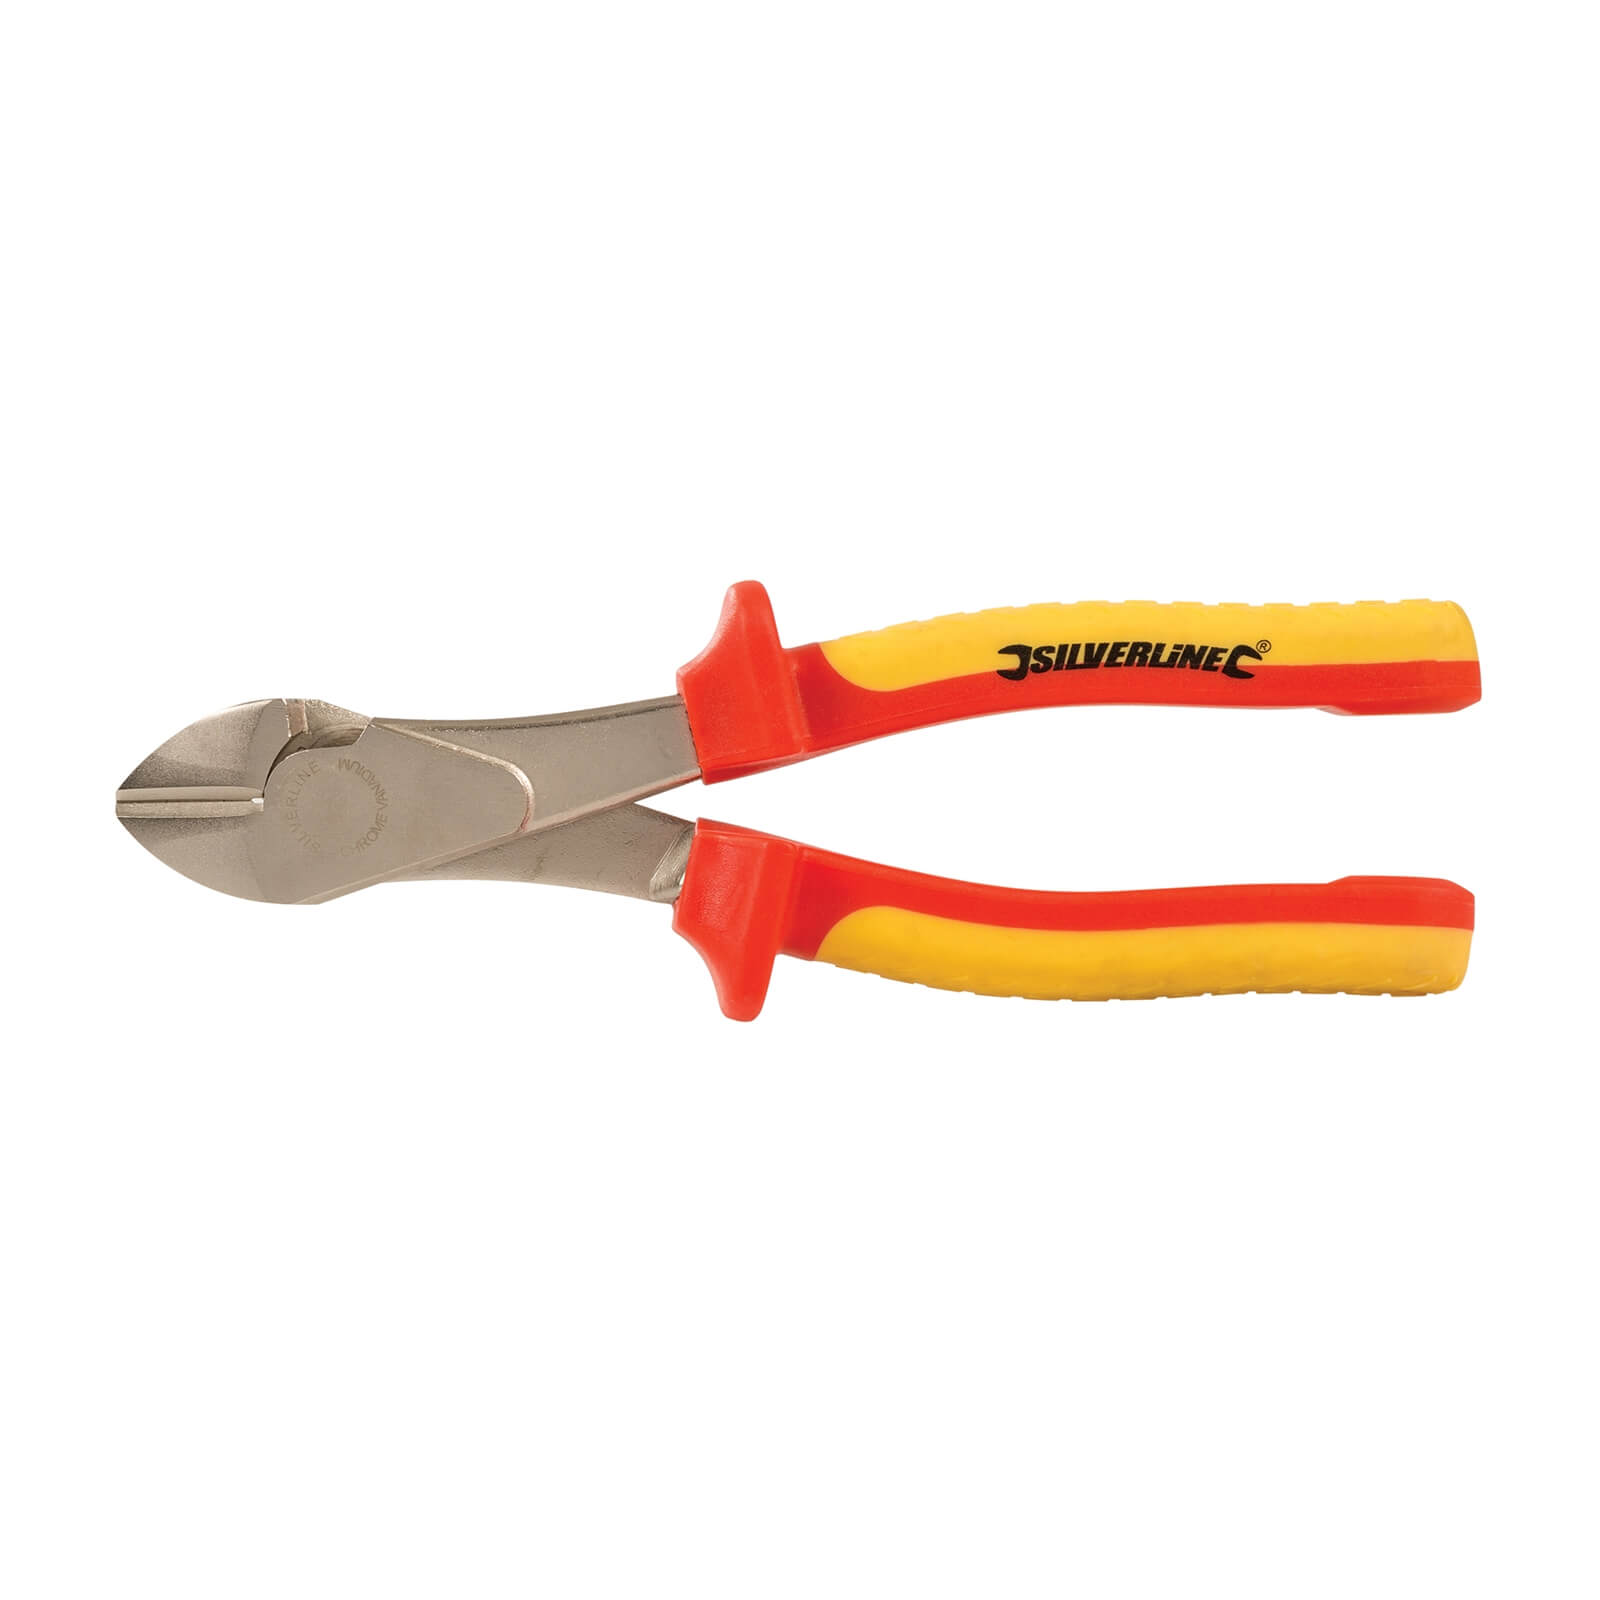 Silverline VDE Expert Side Cutting Pliers 160mm